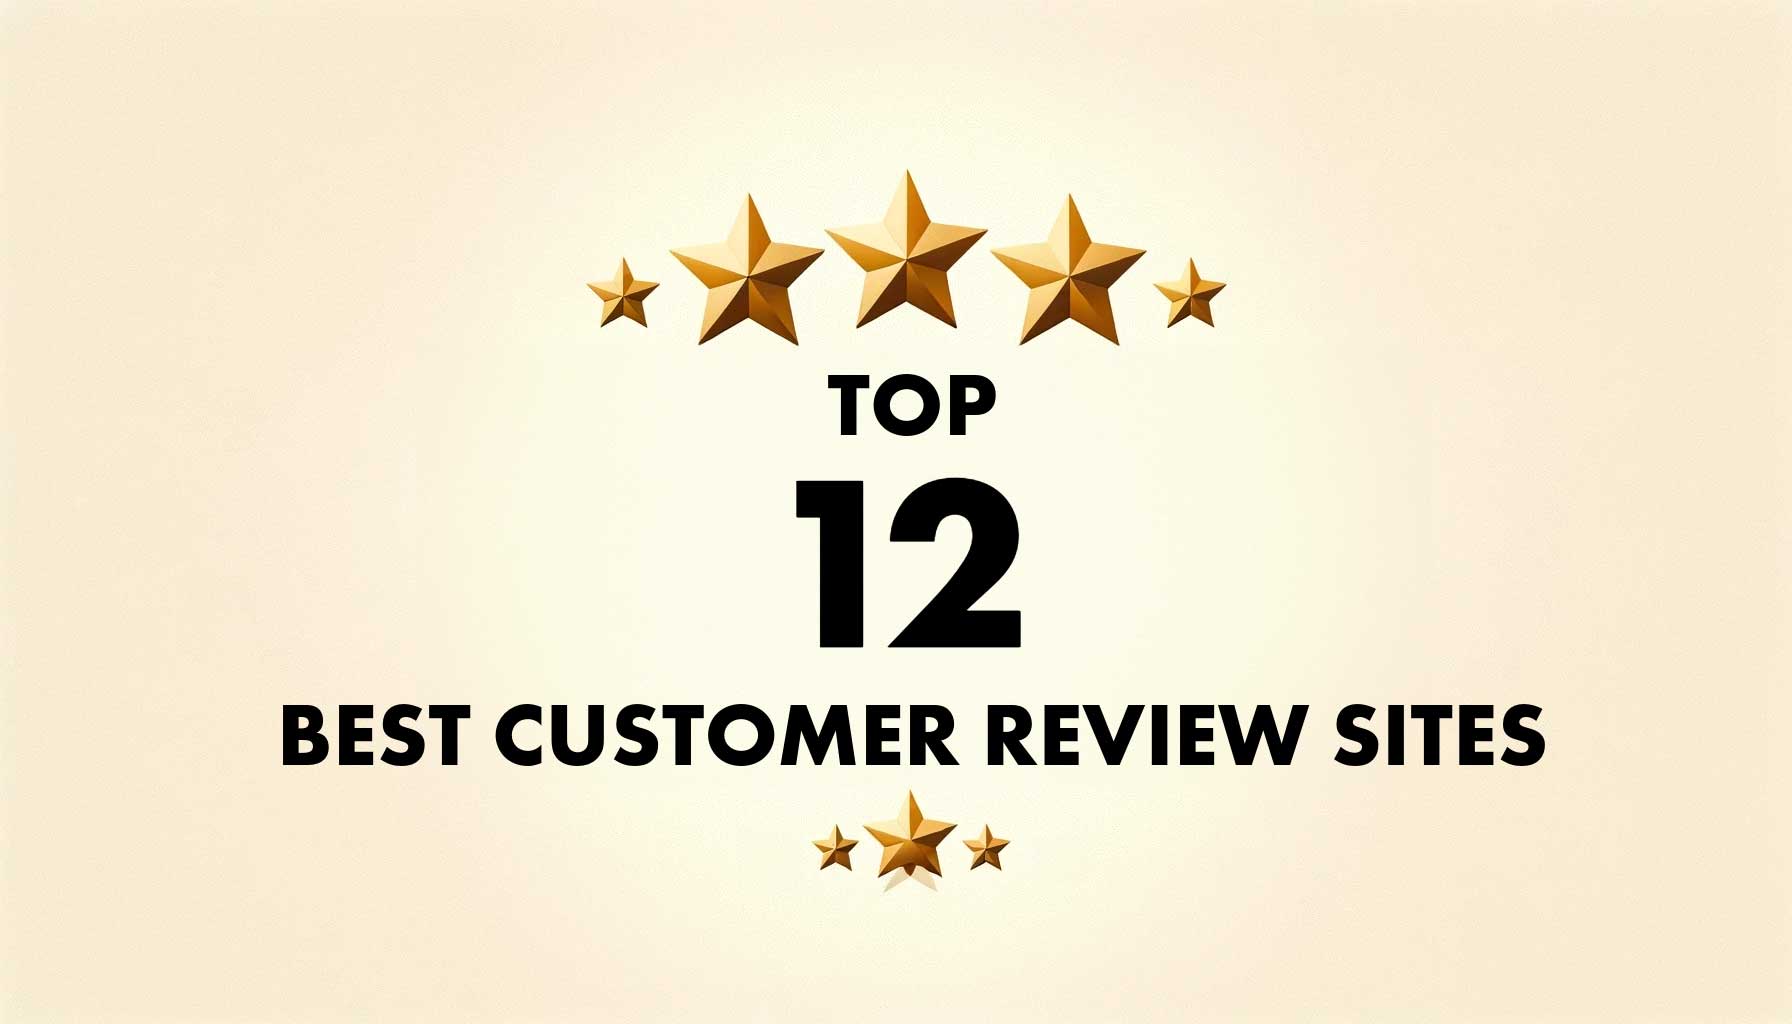 Top 12 best customer review sites